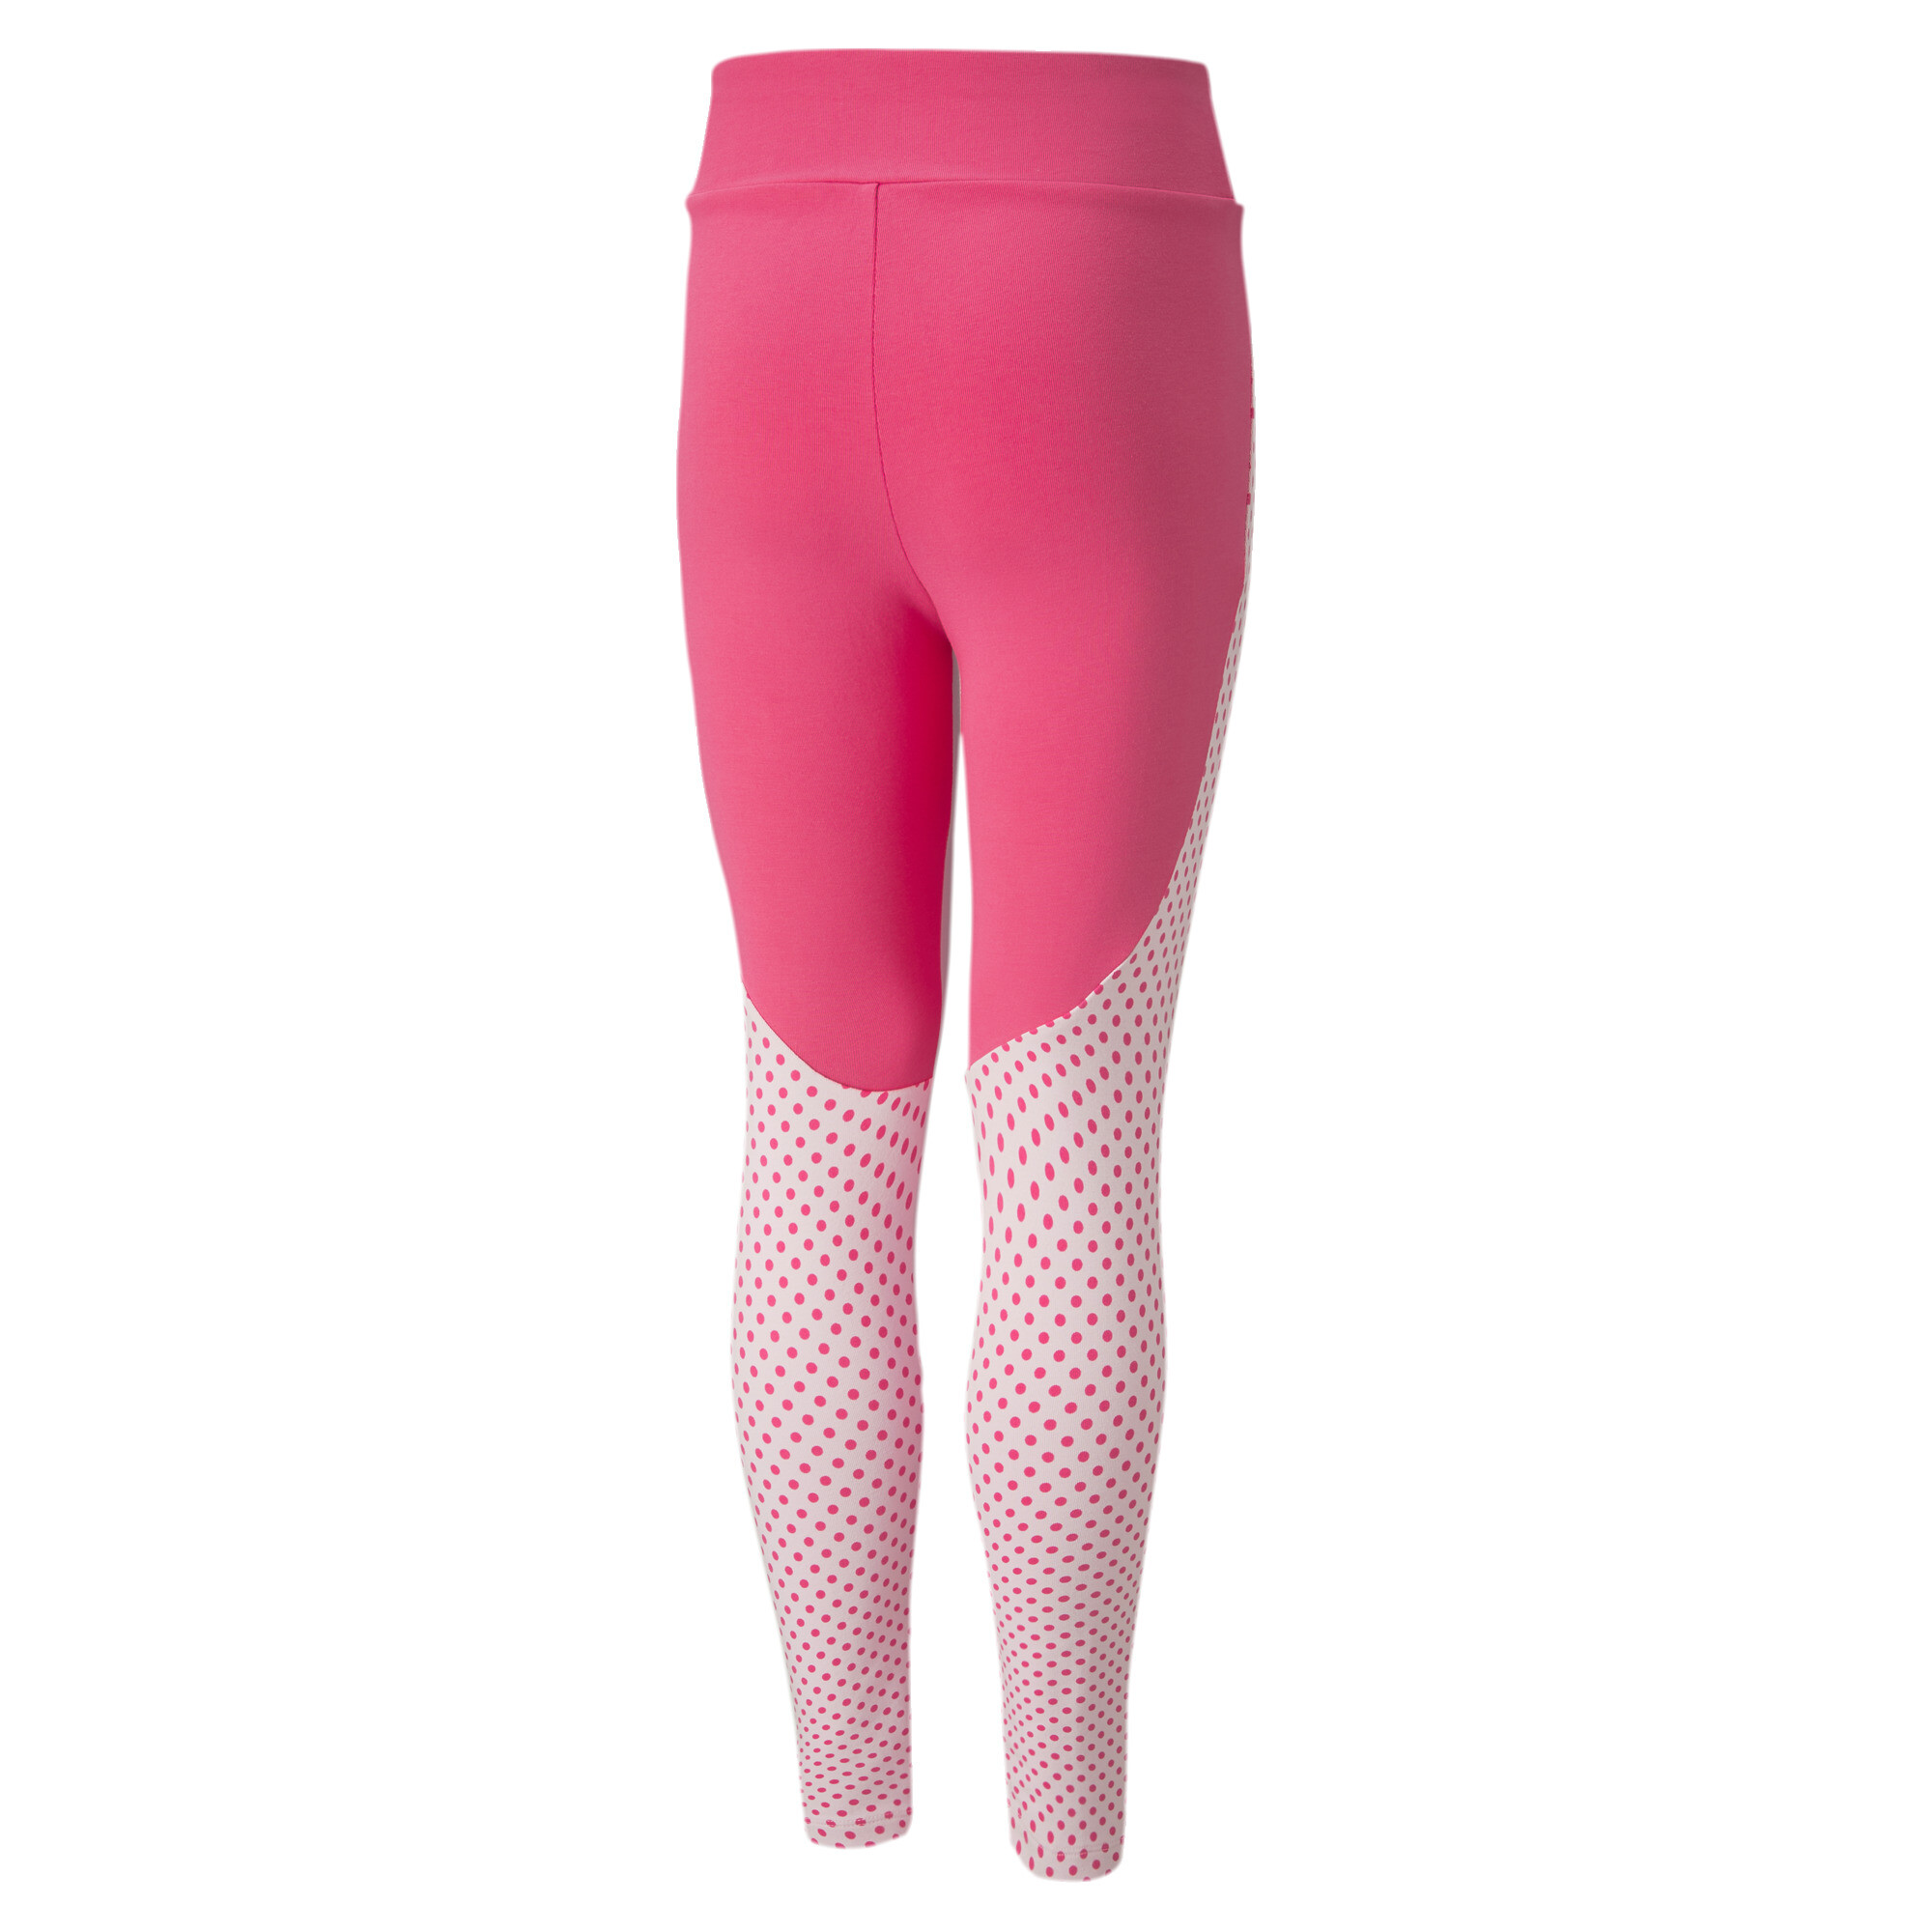 PUMA X MIRACULOUS Leggings In Pink, Size 13-14 Youth